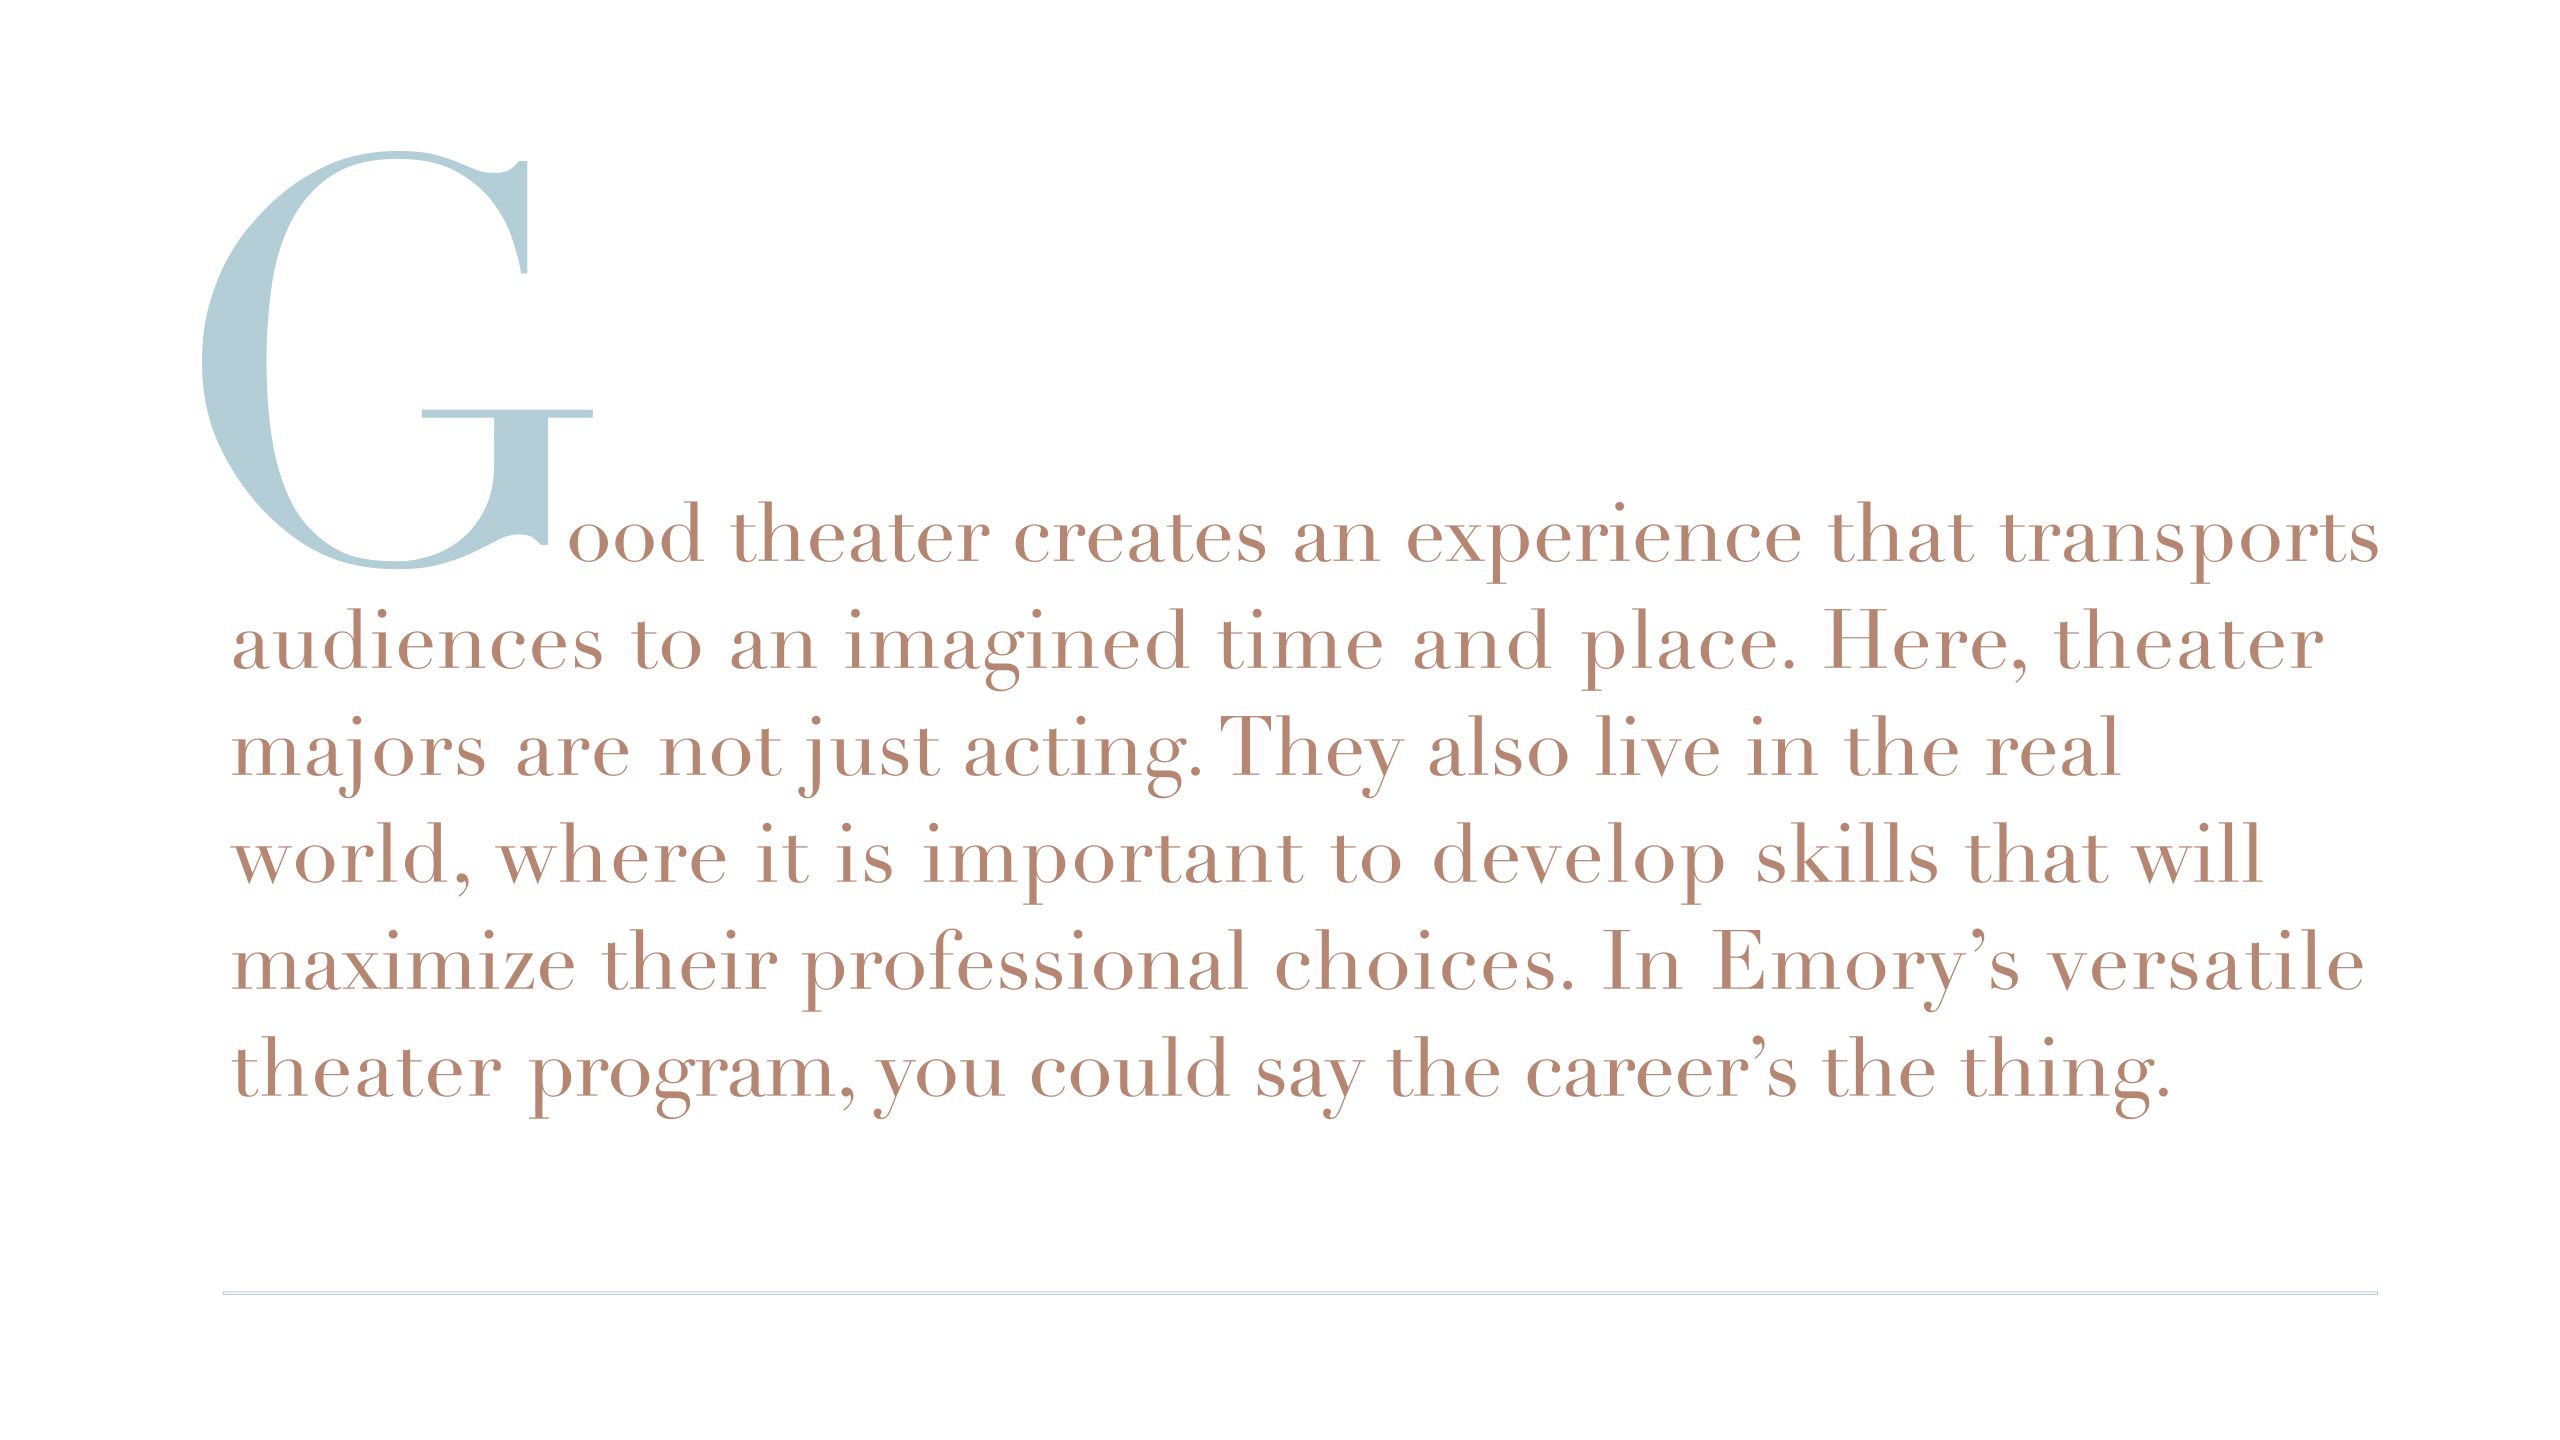 Good theater can create an experience that transports an entire audience to an imagined place and time. At Emory, students are not just playacting, they also live in the real world.